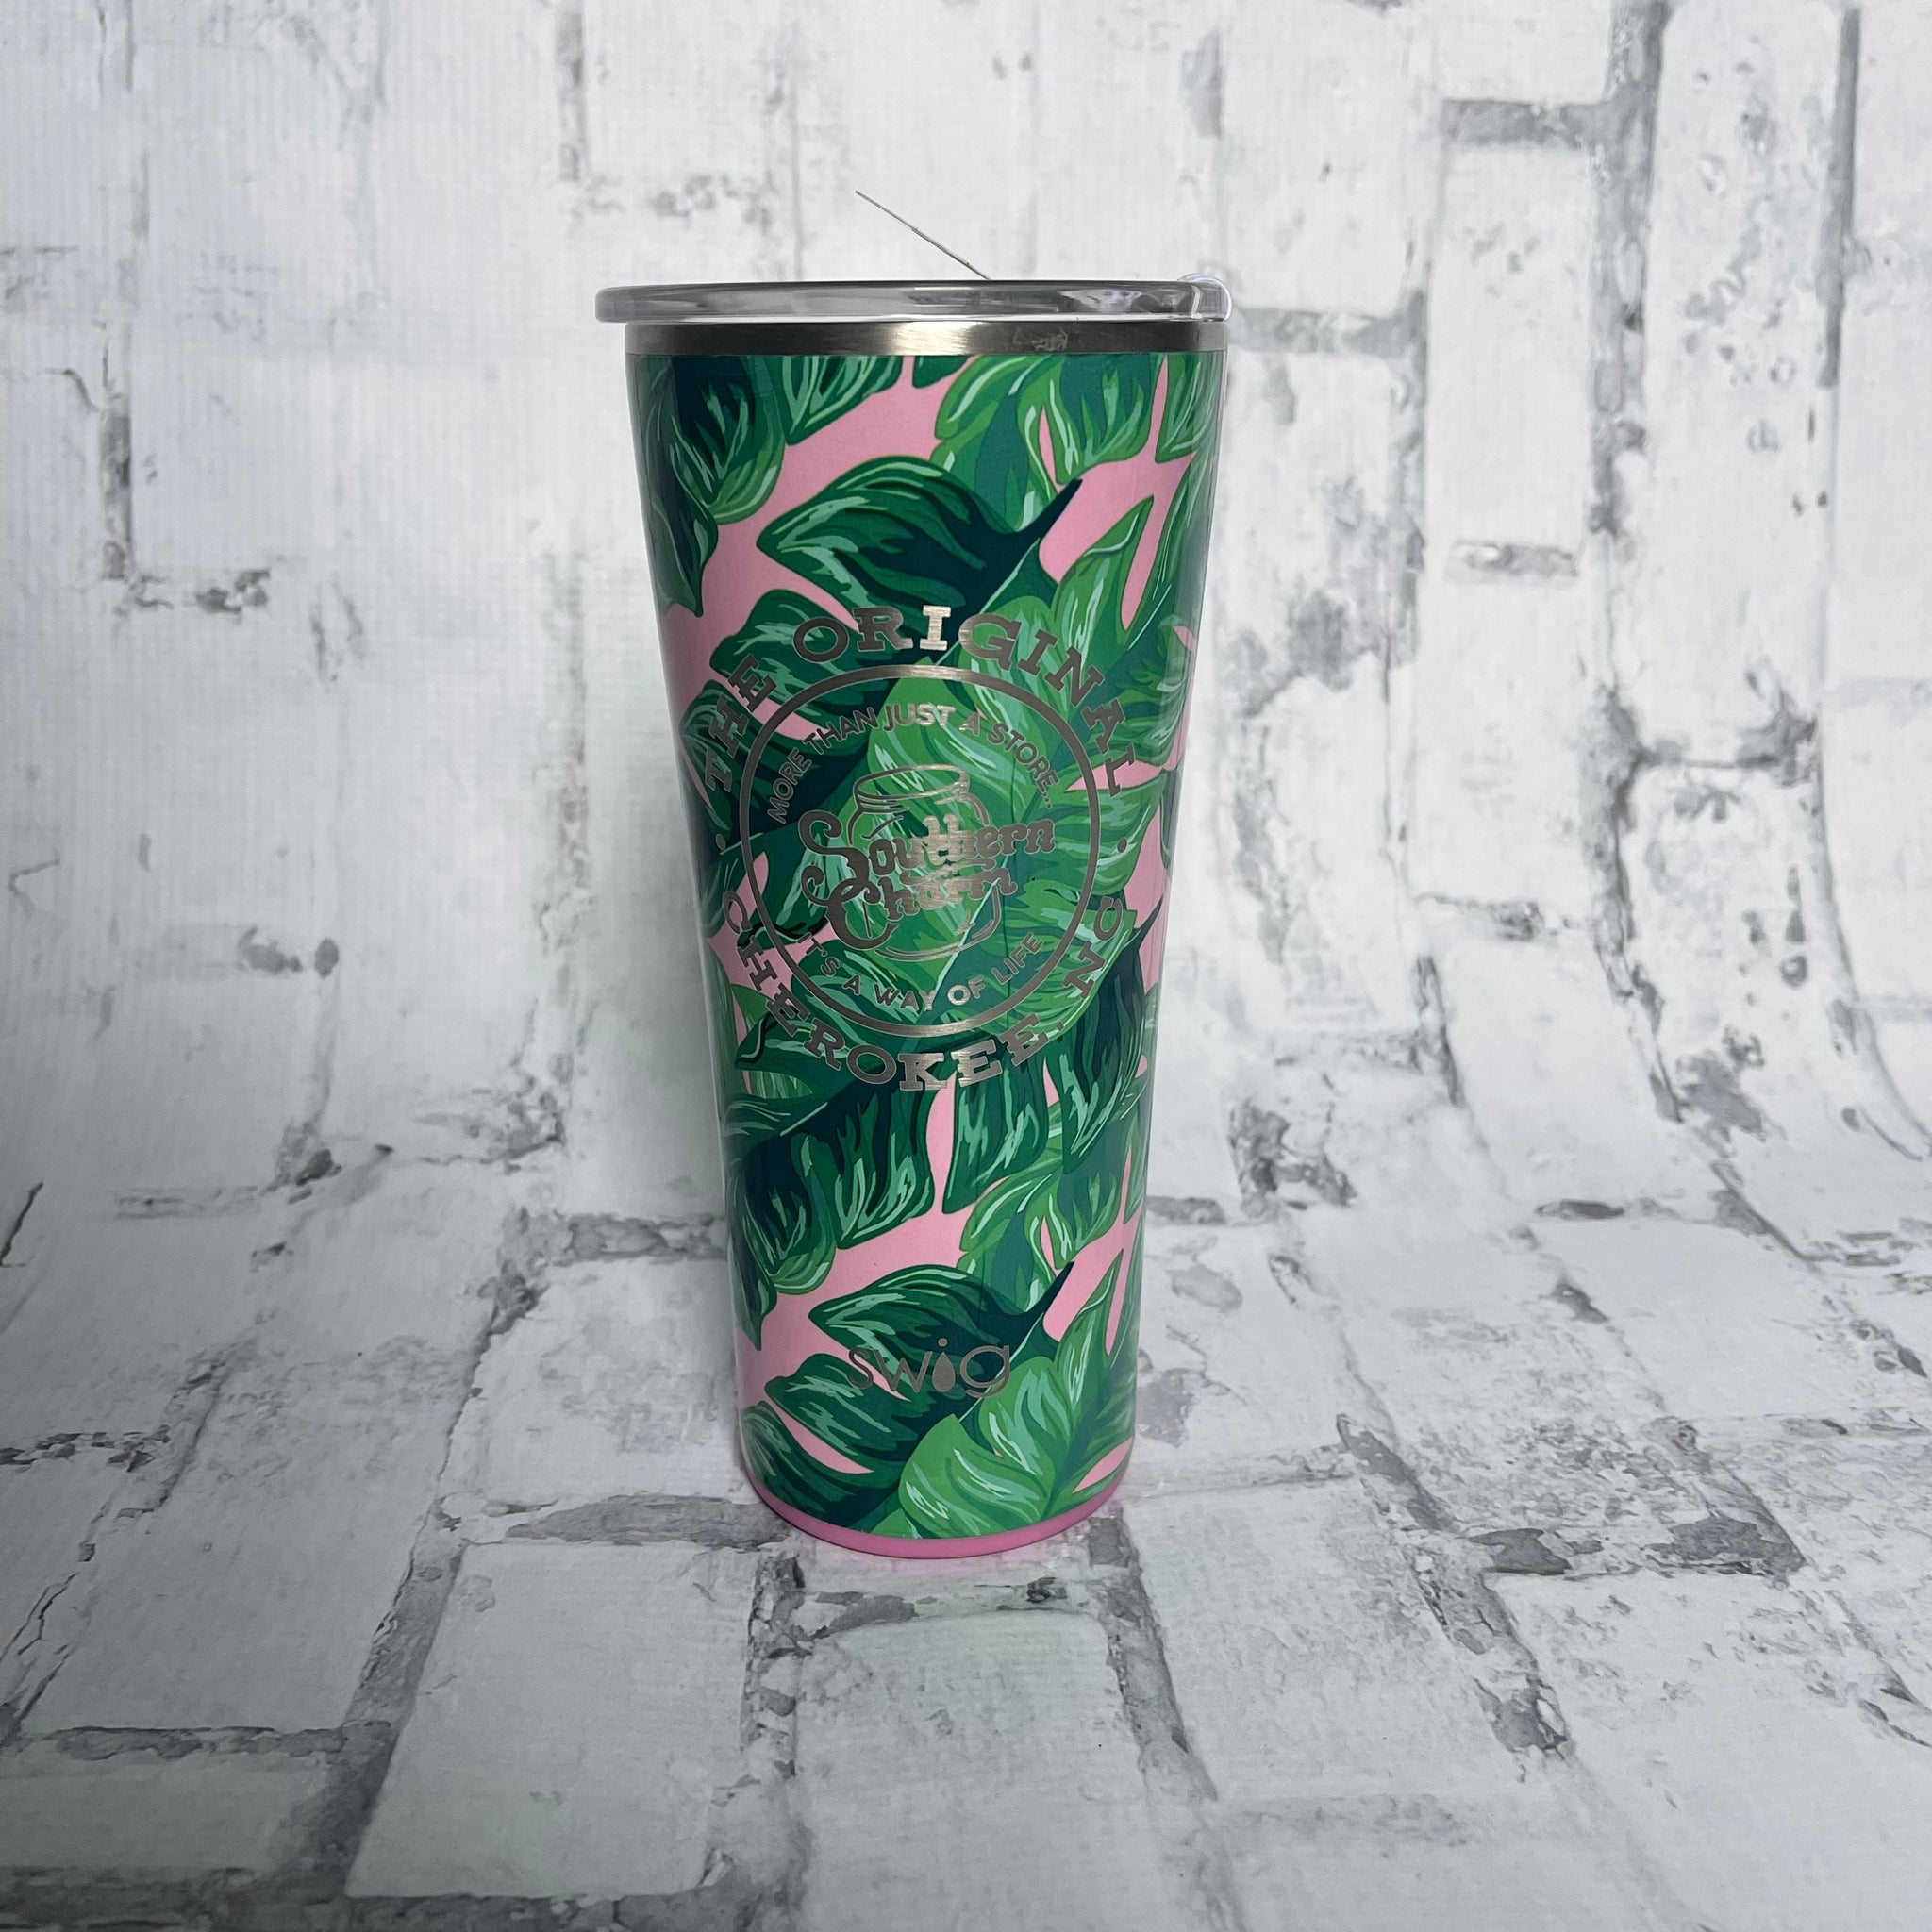 Southern Charm "More Than A Store" Tumbler - Tree Leaves and Pink